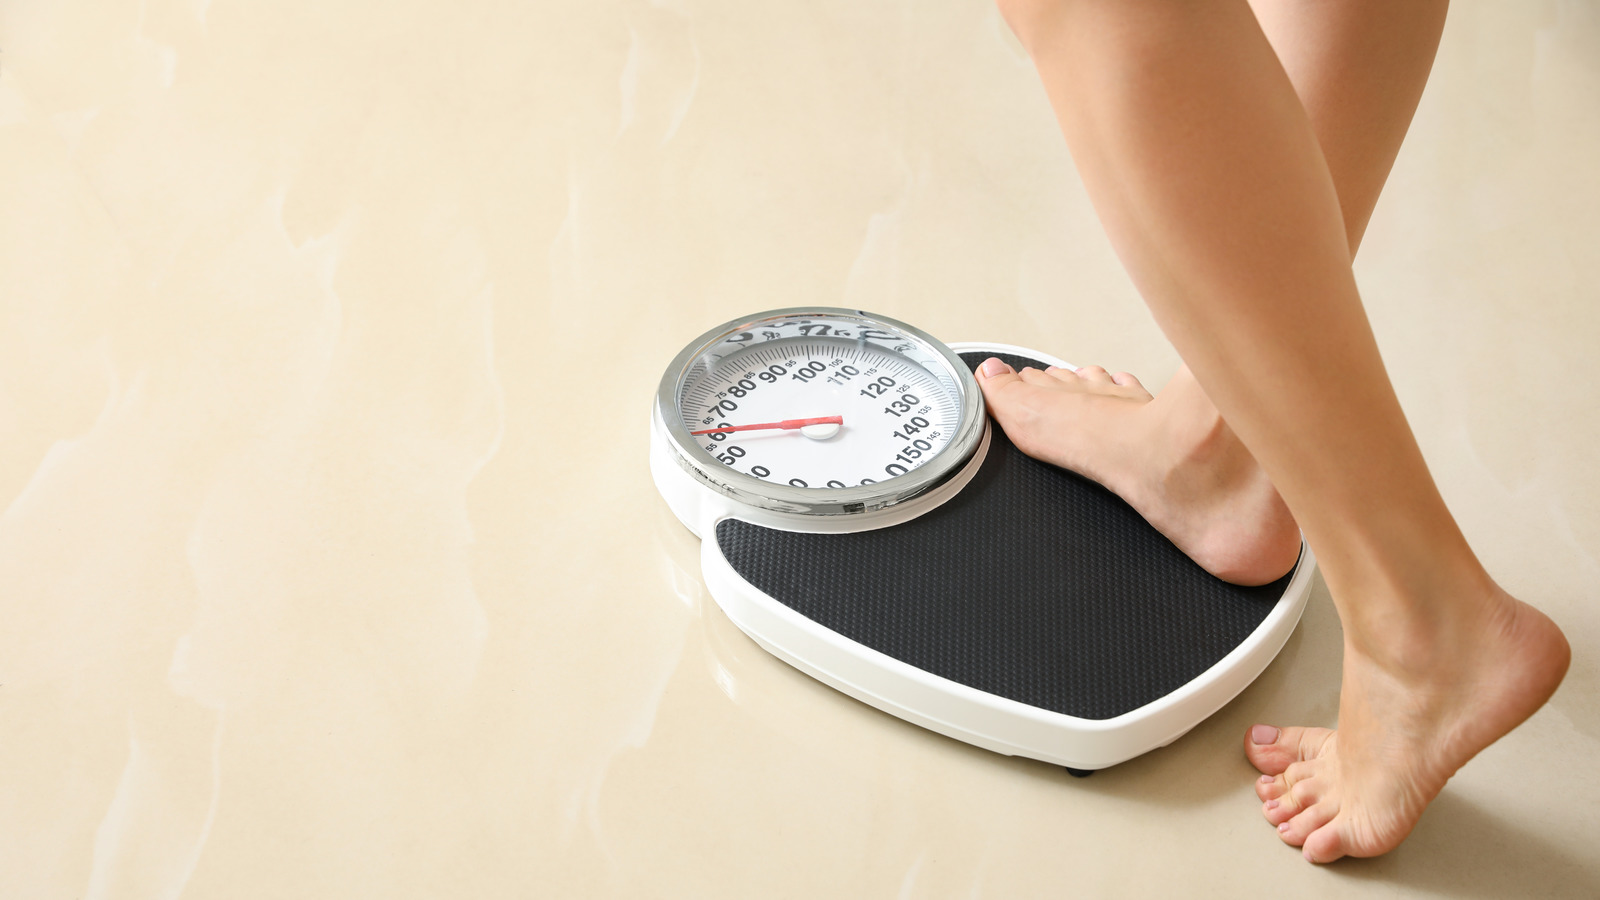 What Are The 5 Healthy Ways To Gain Weight If You Are Underweight?